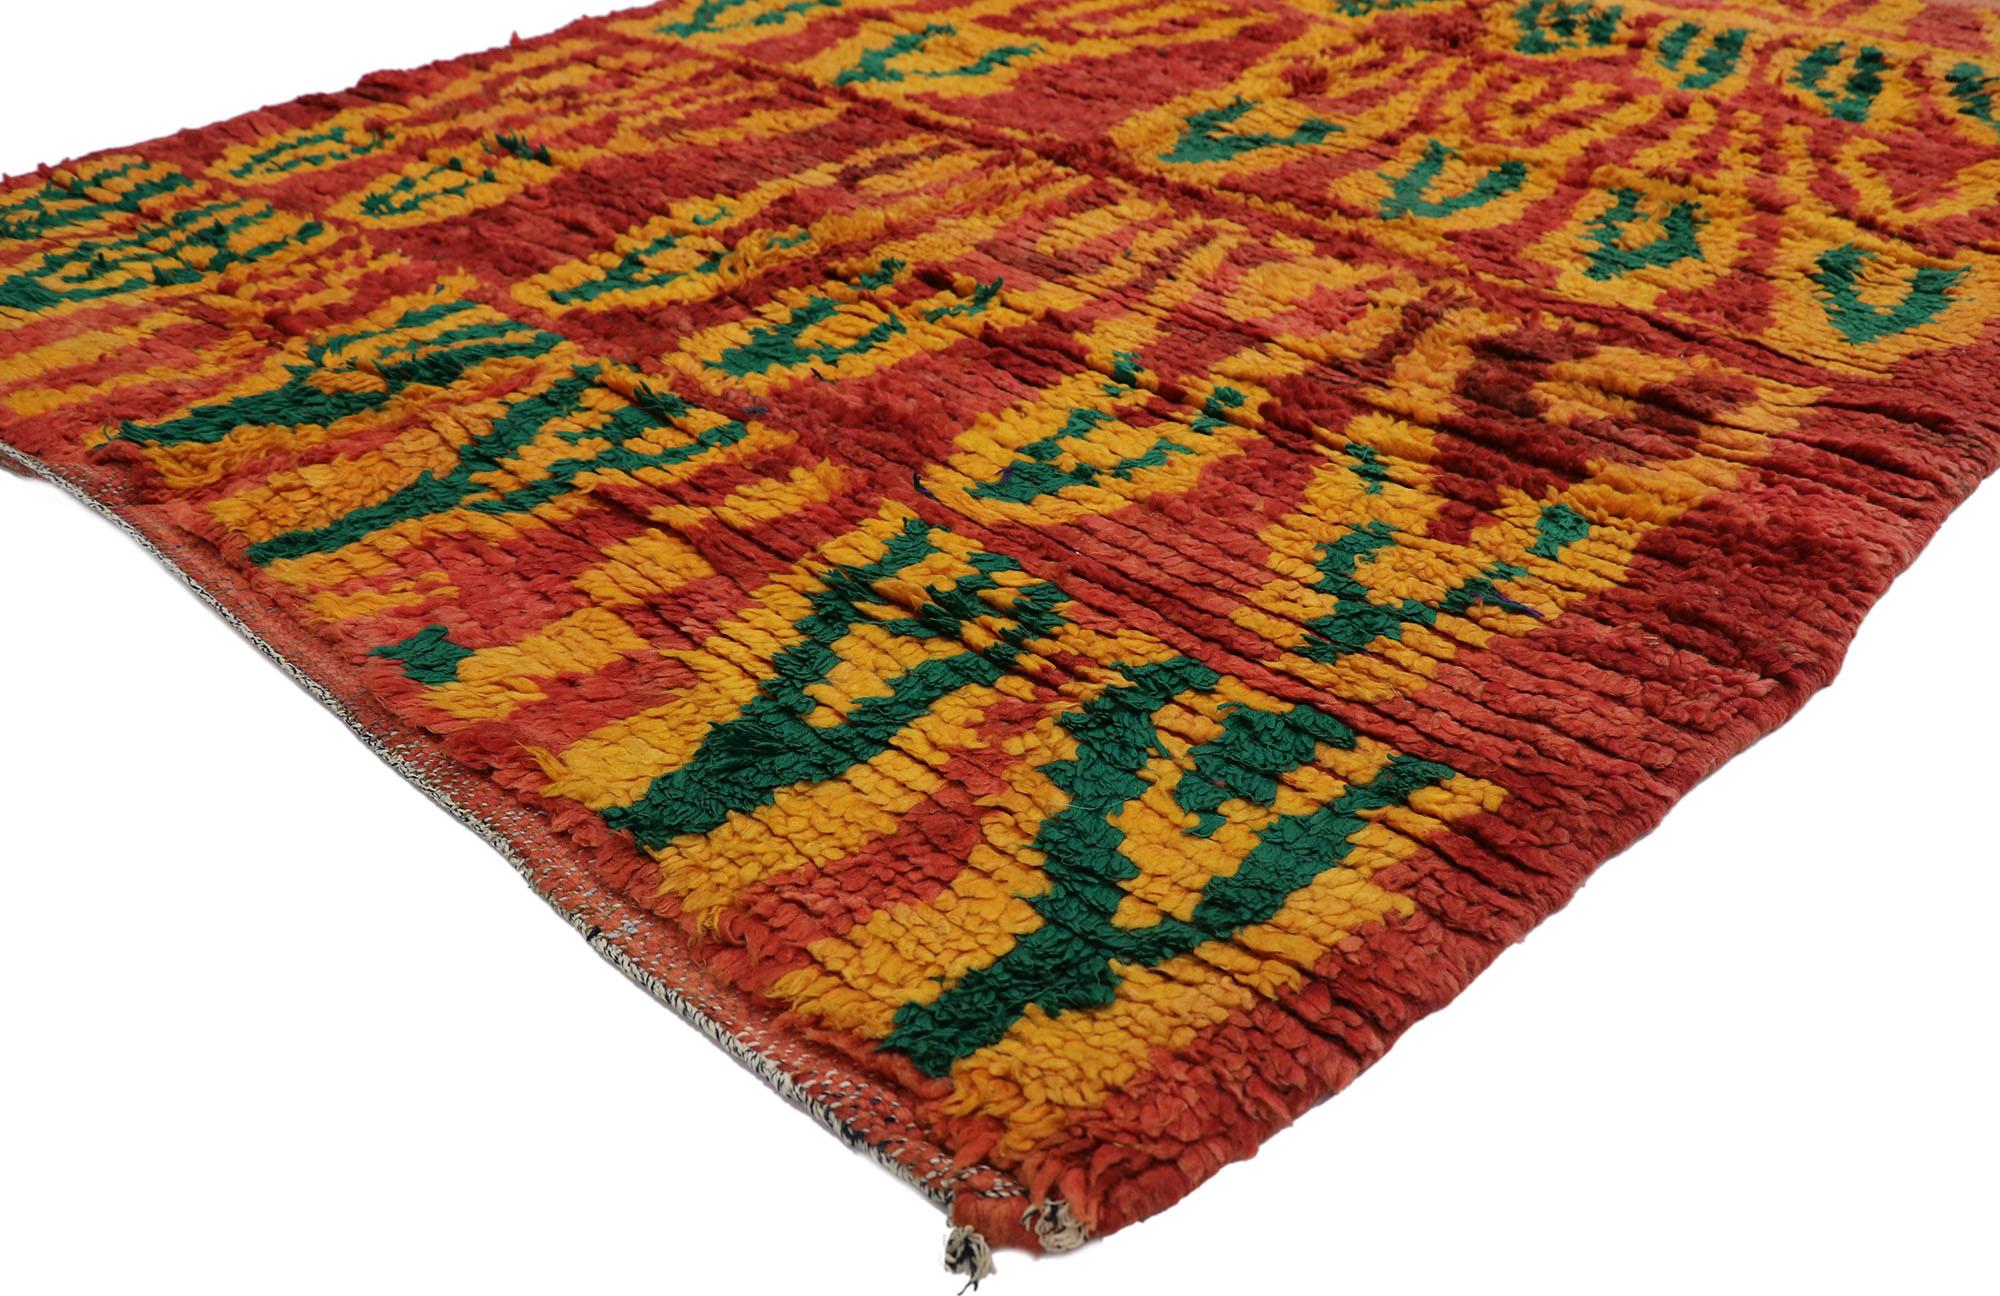 21207 Vintage Red Boujad Moroccan Rug, 05'06 x 07'00. 
Dive into the lively essence embodied by Boujad rugs, emerging from the vibrant streets of Boujad in the Khouribga region. Skillfully woven by Berber tribes, notably the Haouz and Rehamna, these